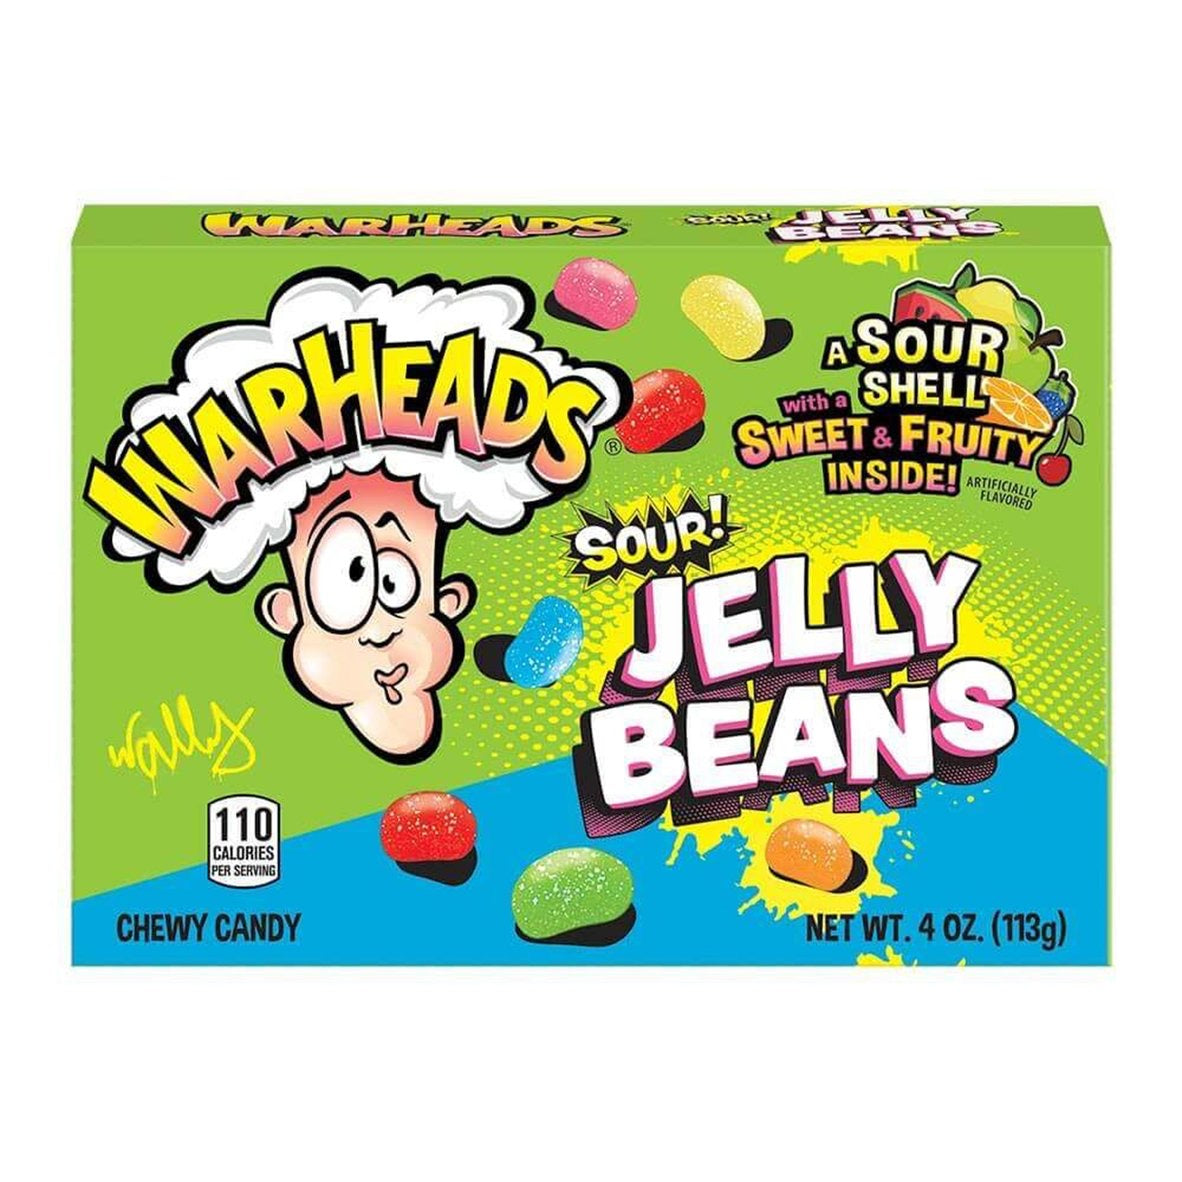 Warheads Sour Jelly Beans (Halal)